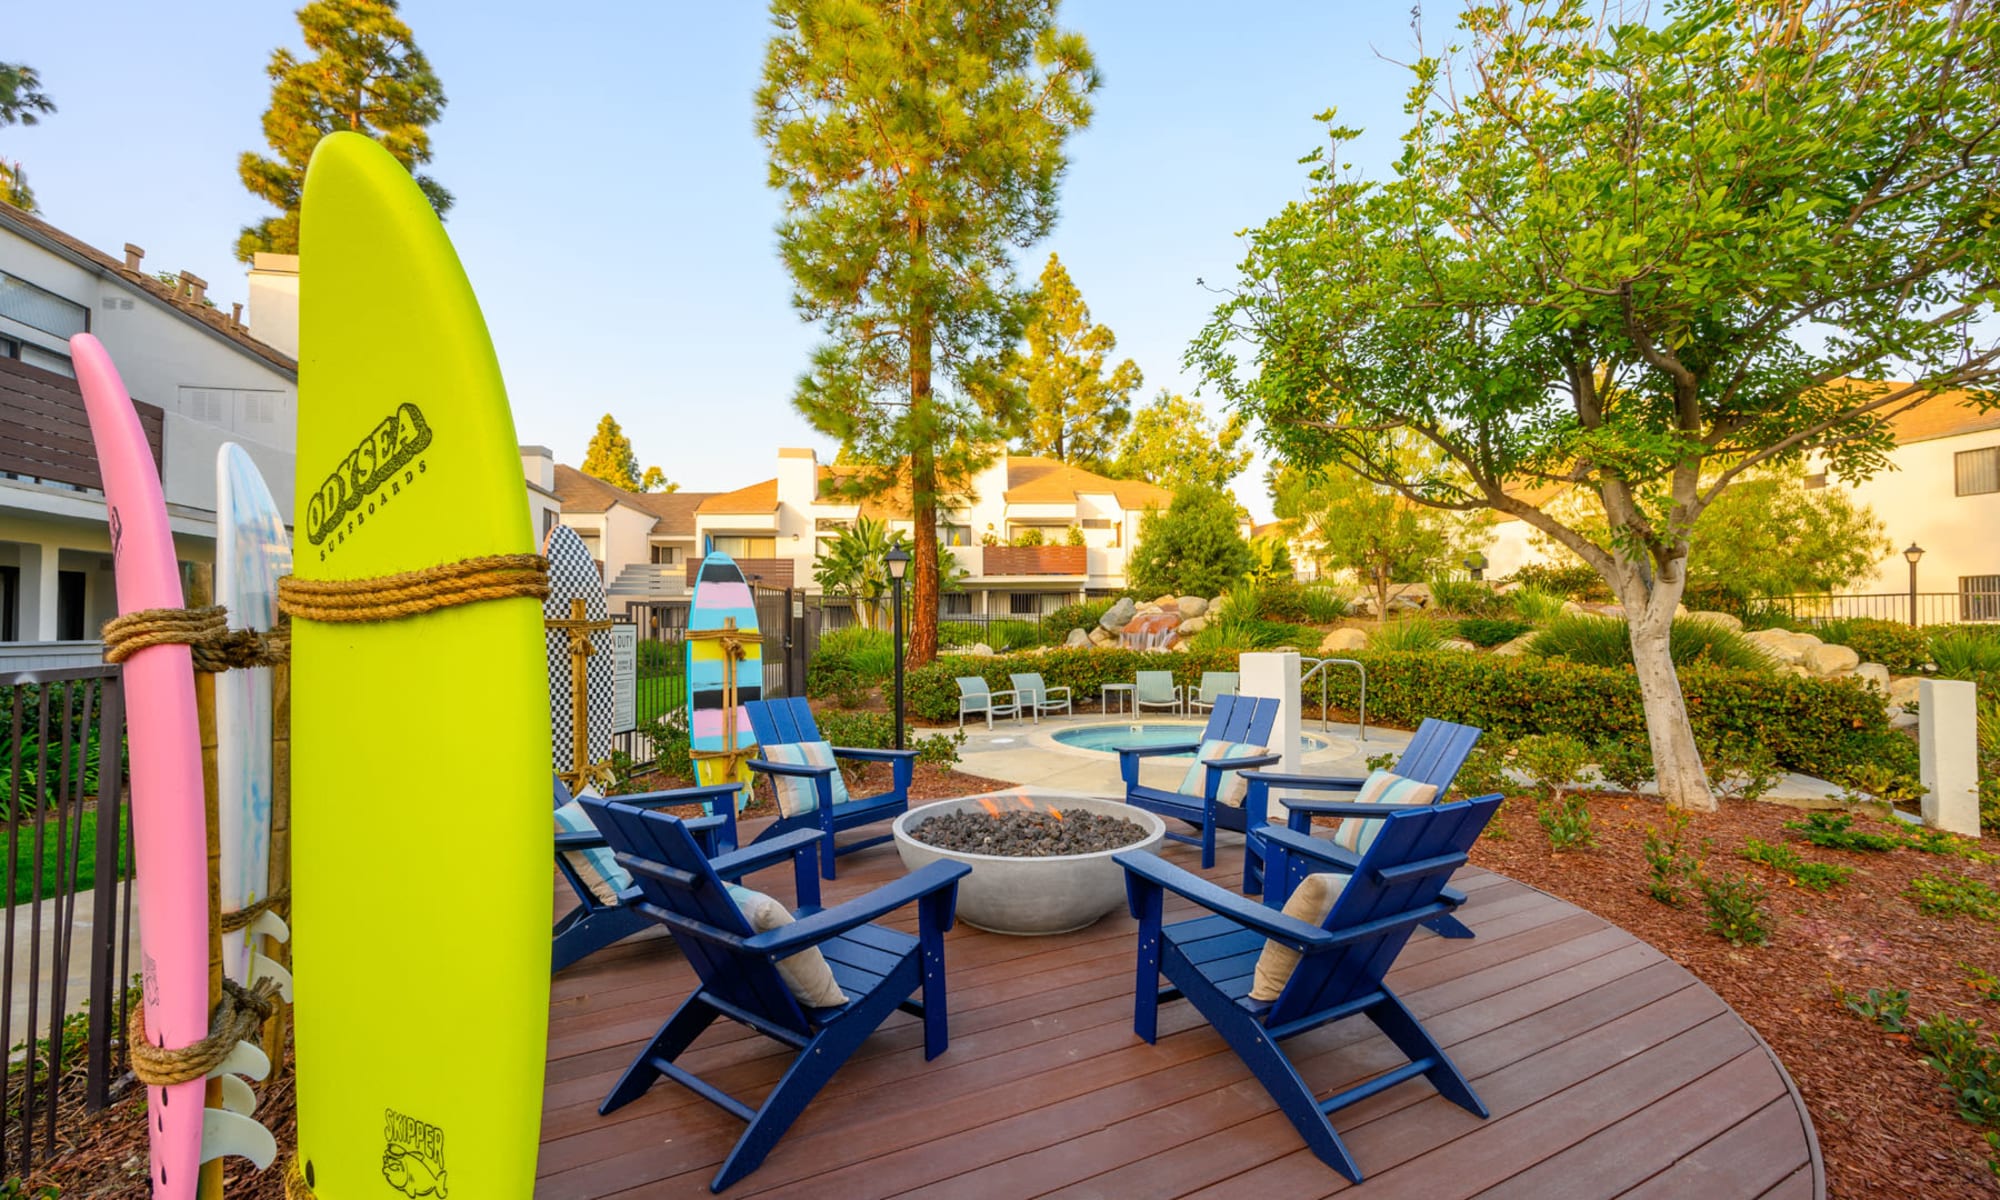 Surfboards and Adirondack chairs around the fire pit at Pleasanton Place Apartment Homes in Pleasanton, California